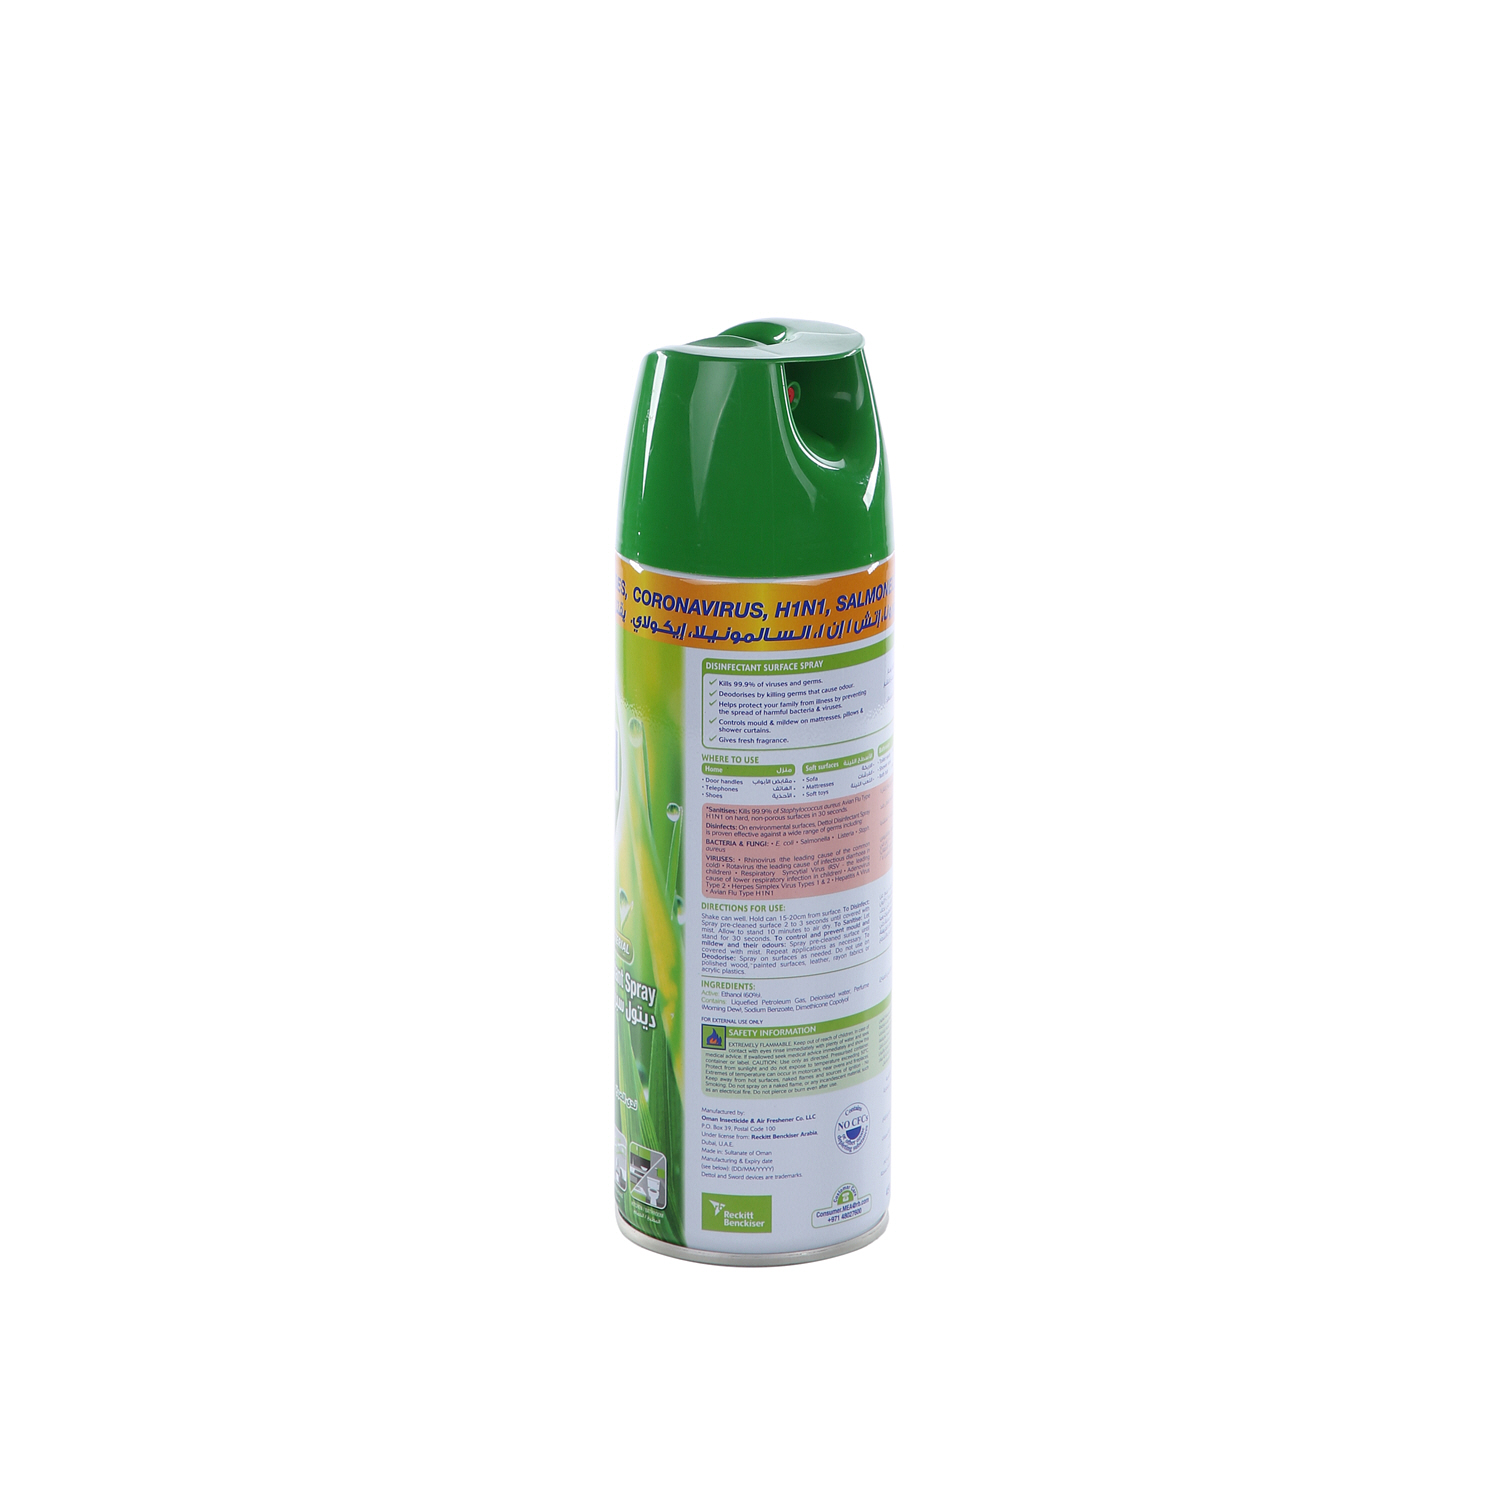 Dettol Morning Dew Disinfectant Surface Spray 450 ml